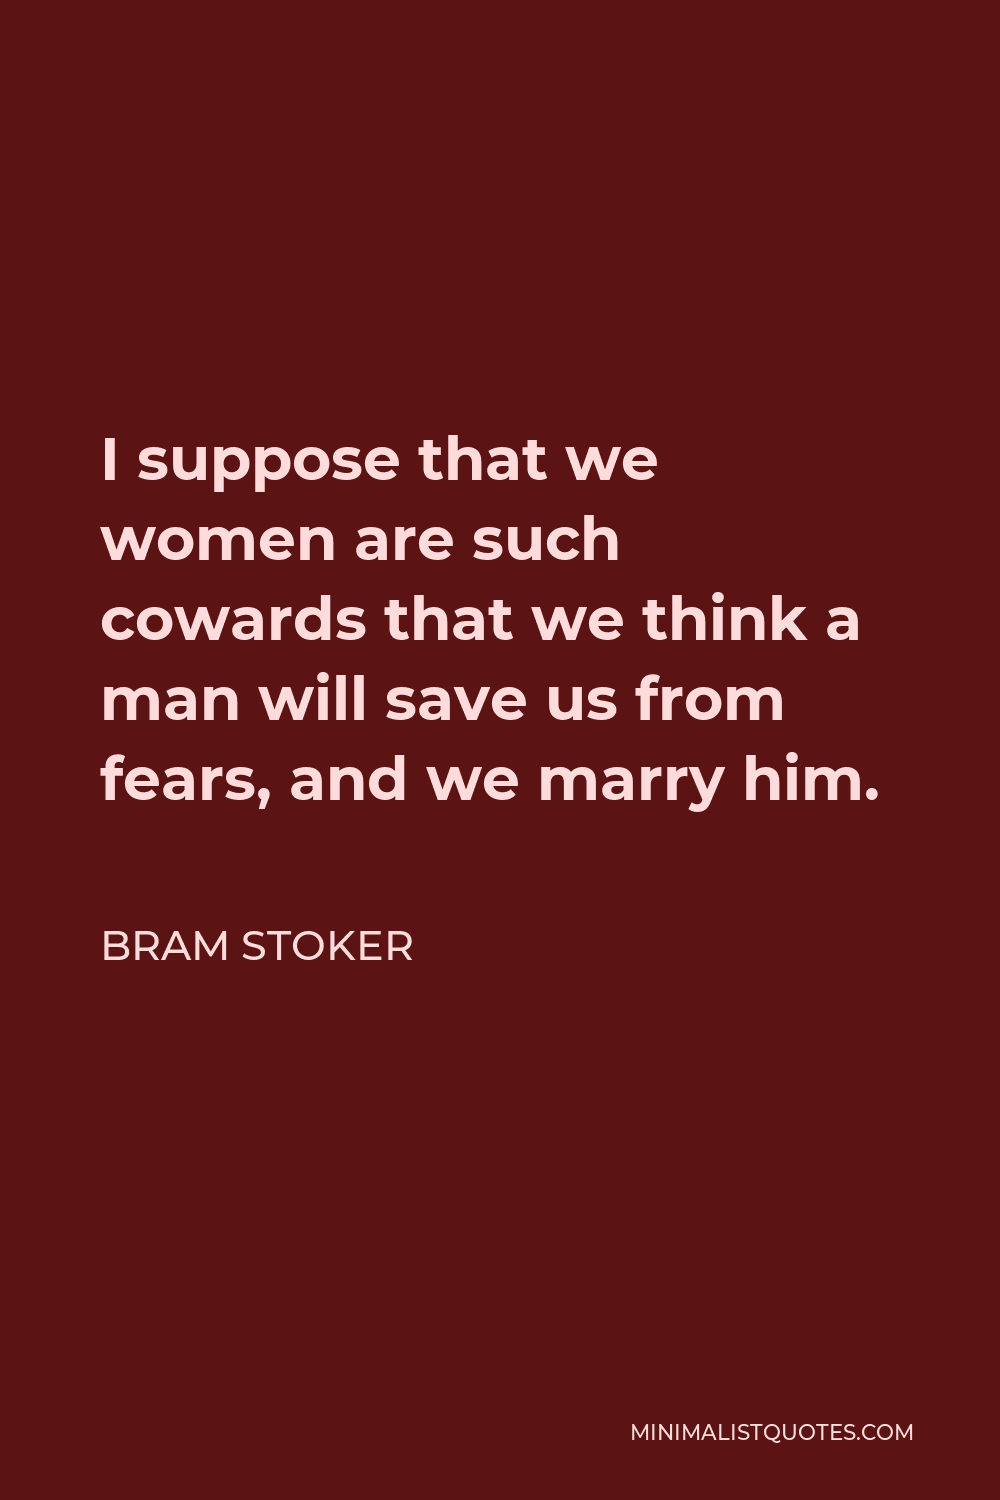 Bram Stoker Quote - I suppose that we women are such cowards that we think a man will save us from fears, and we marry him.